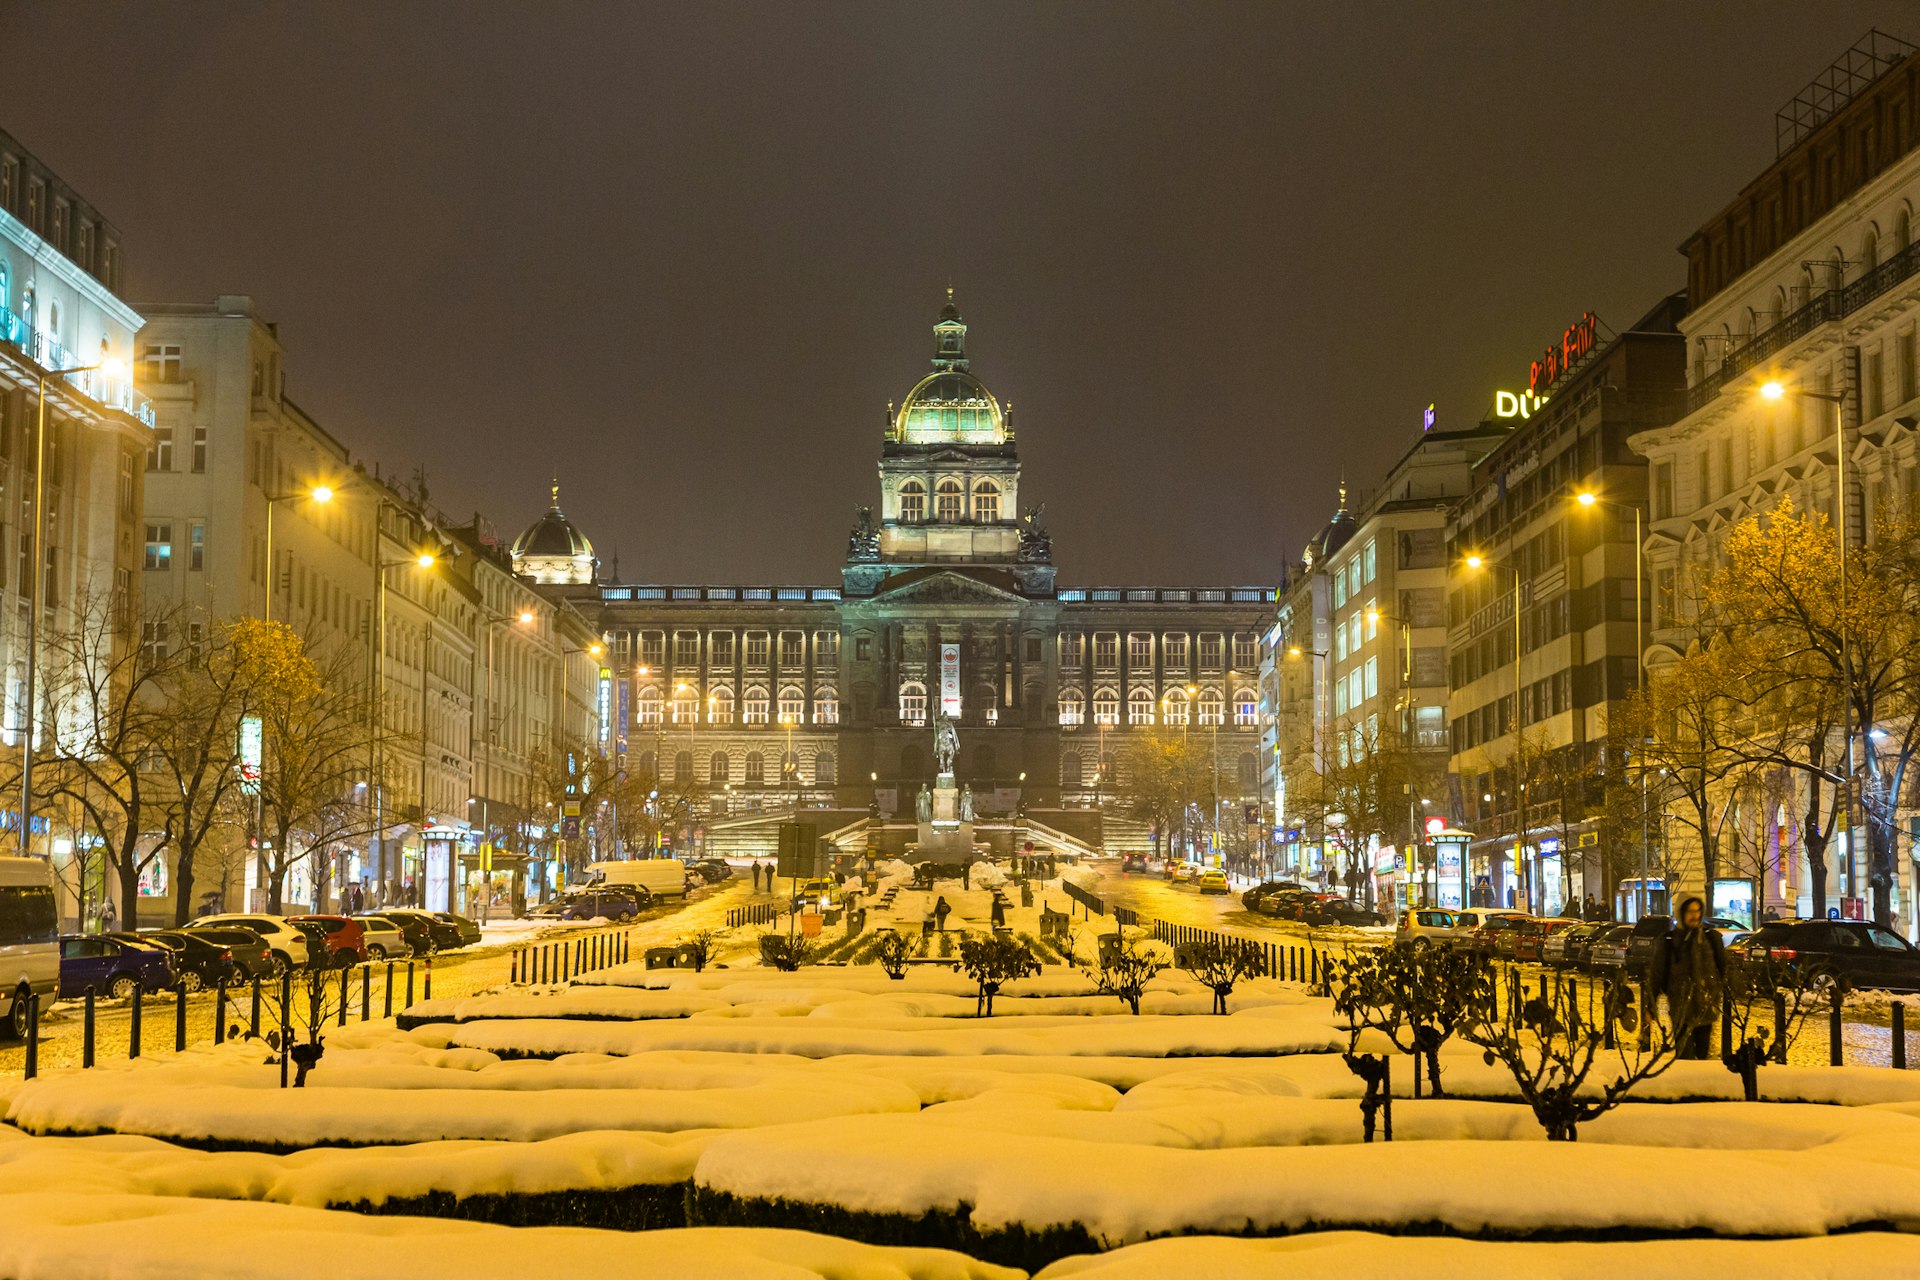 Wenceslas Square in Prague covered in snow looking up at the spires of the national museum